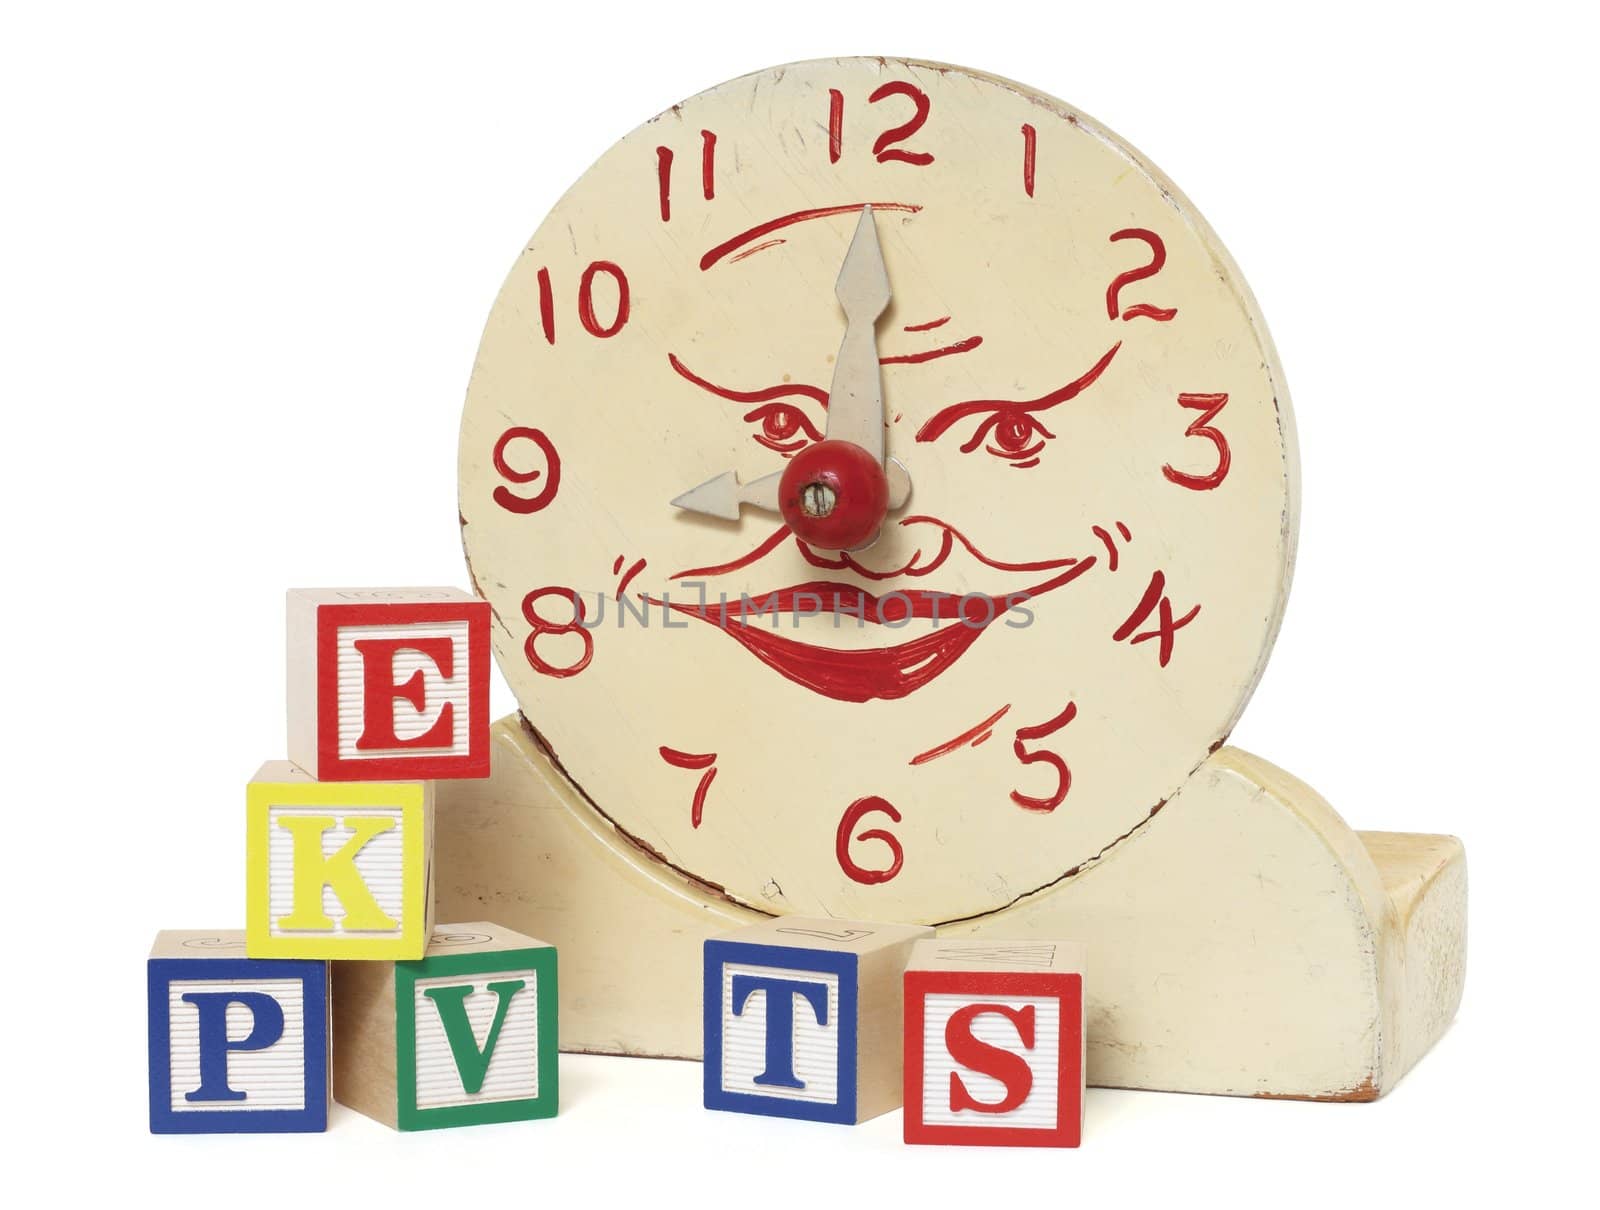 Old Handmade Wooden Toy Clock and Alphabet Blocks by Em3